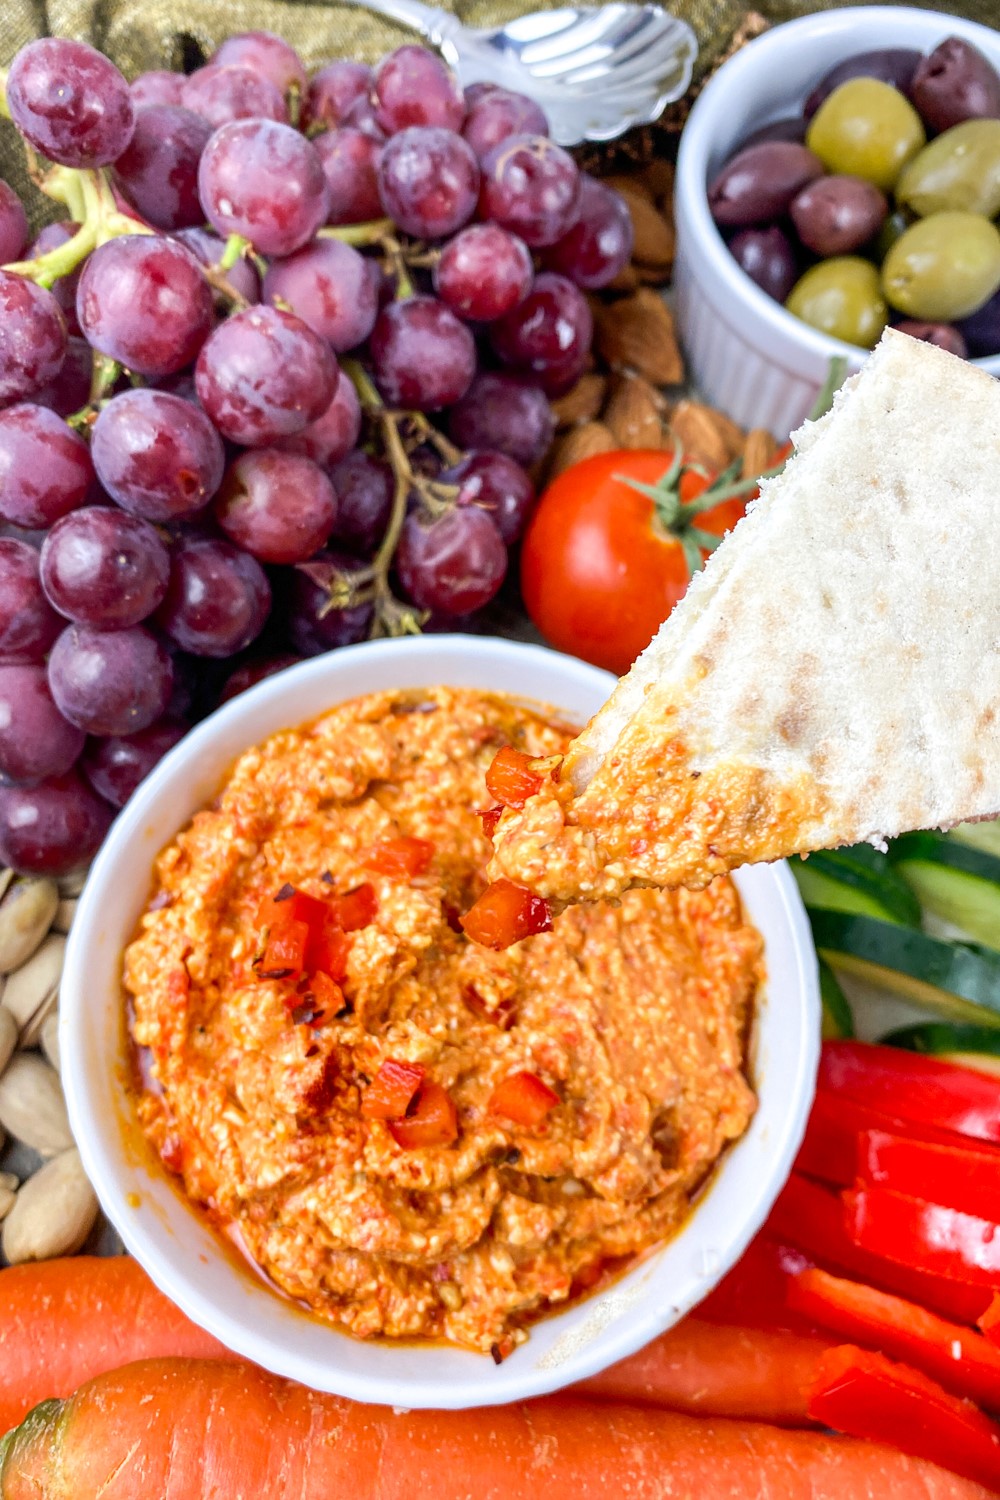 This easy to make Mediterranean mezze platter is the perfect party appetizer or a light meal for friends and family.